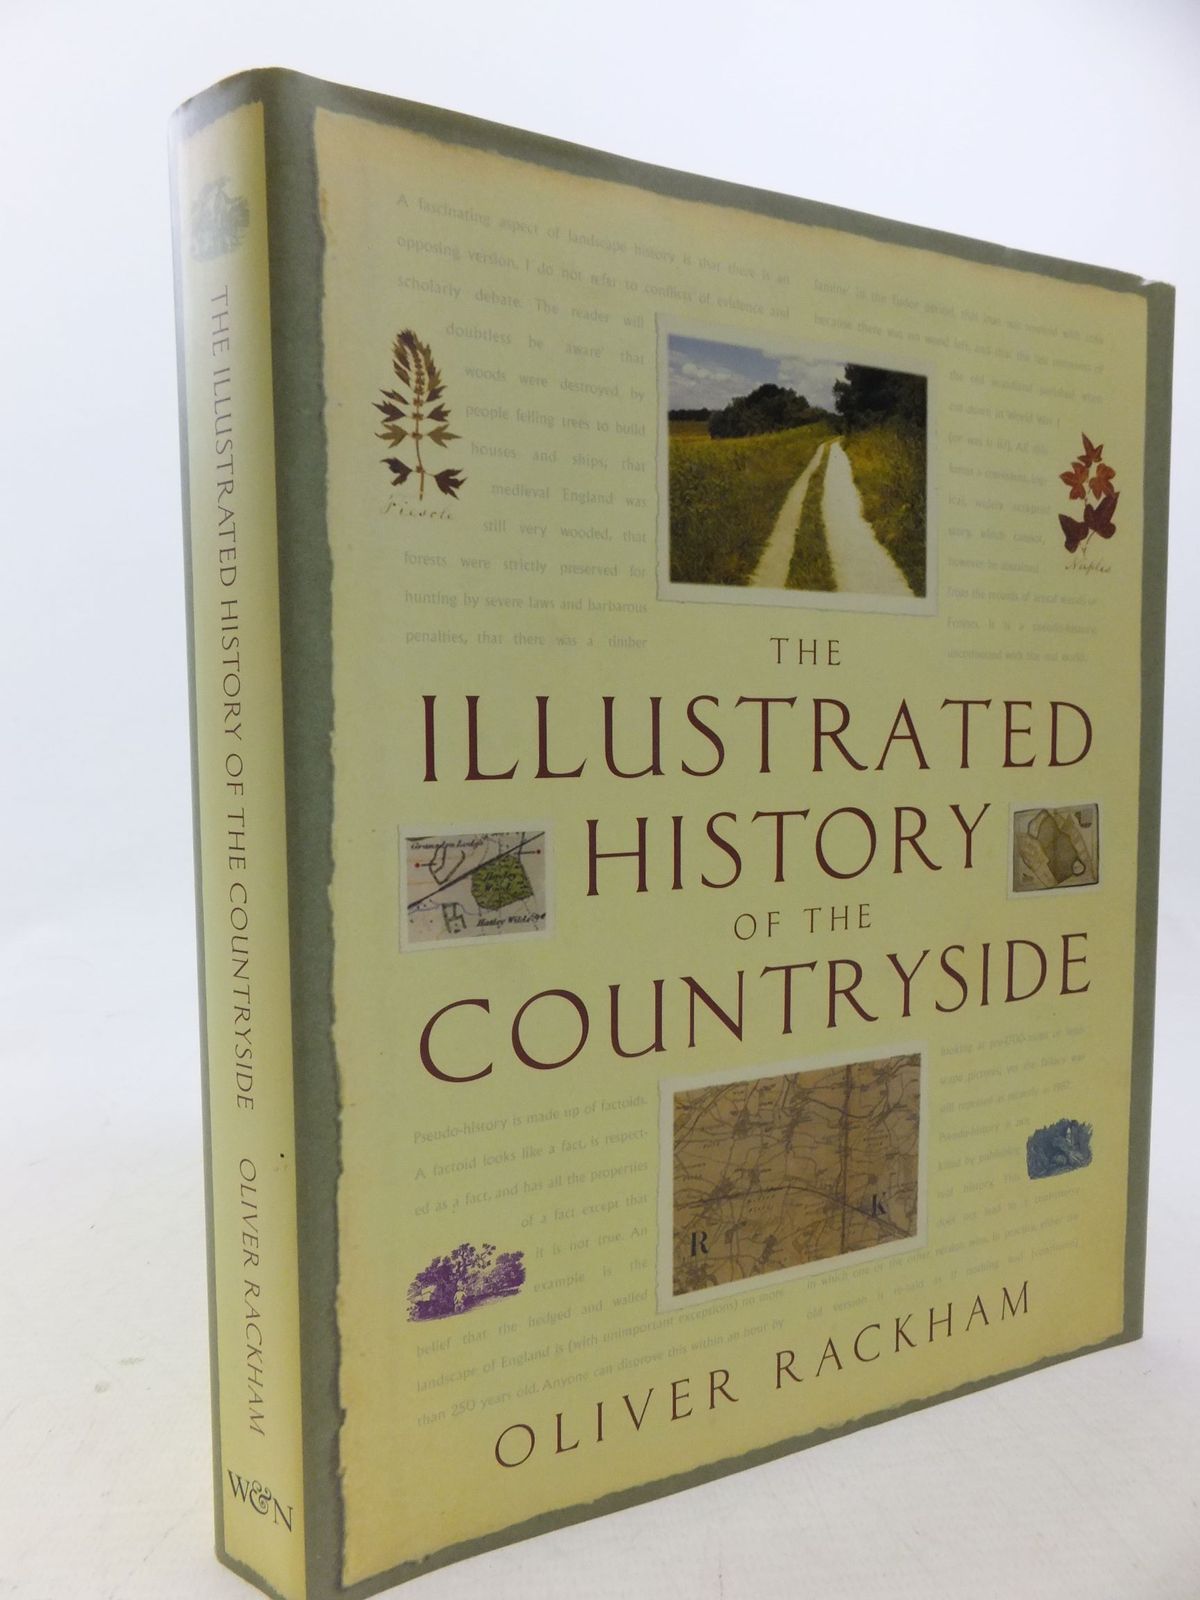 The Illustrated History Of The Countryside